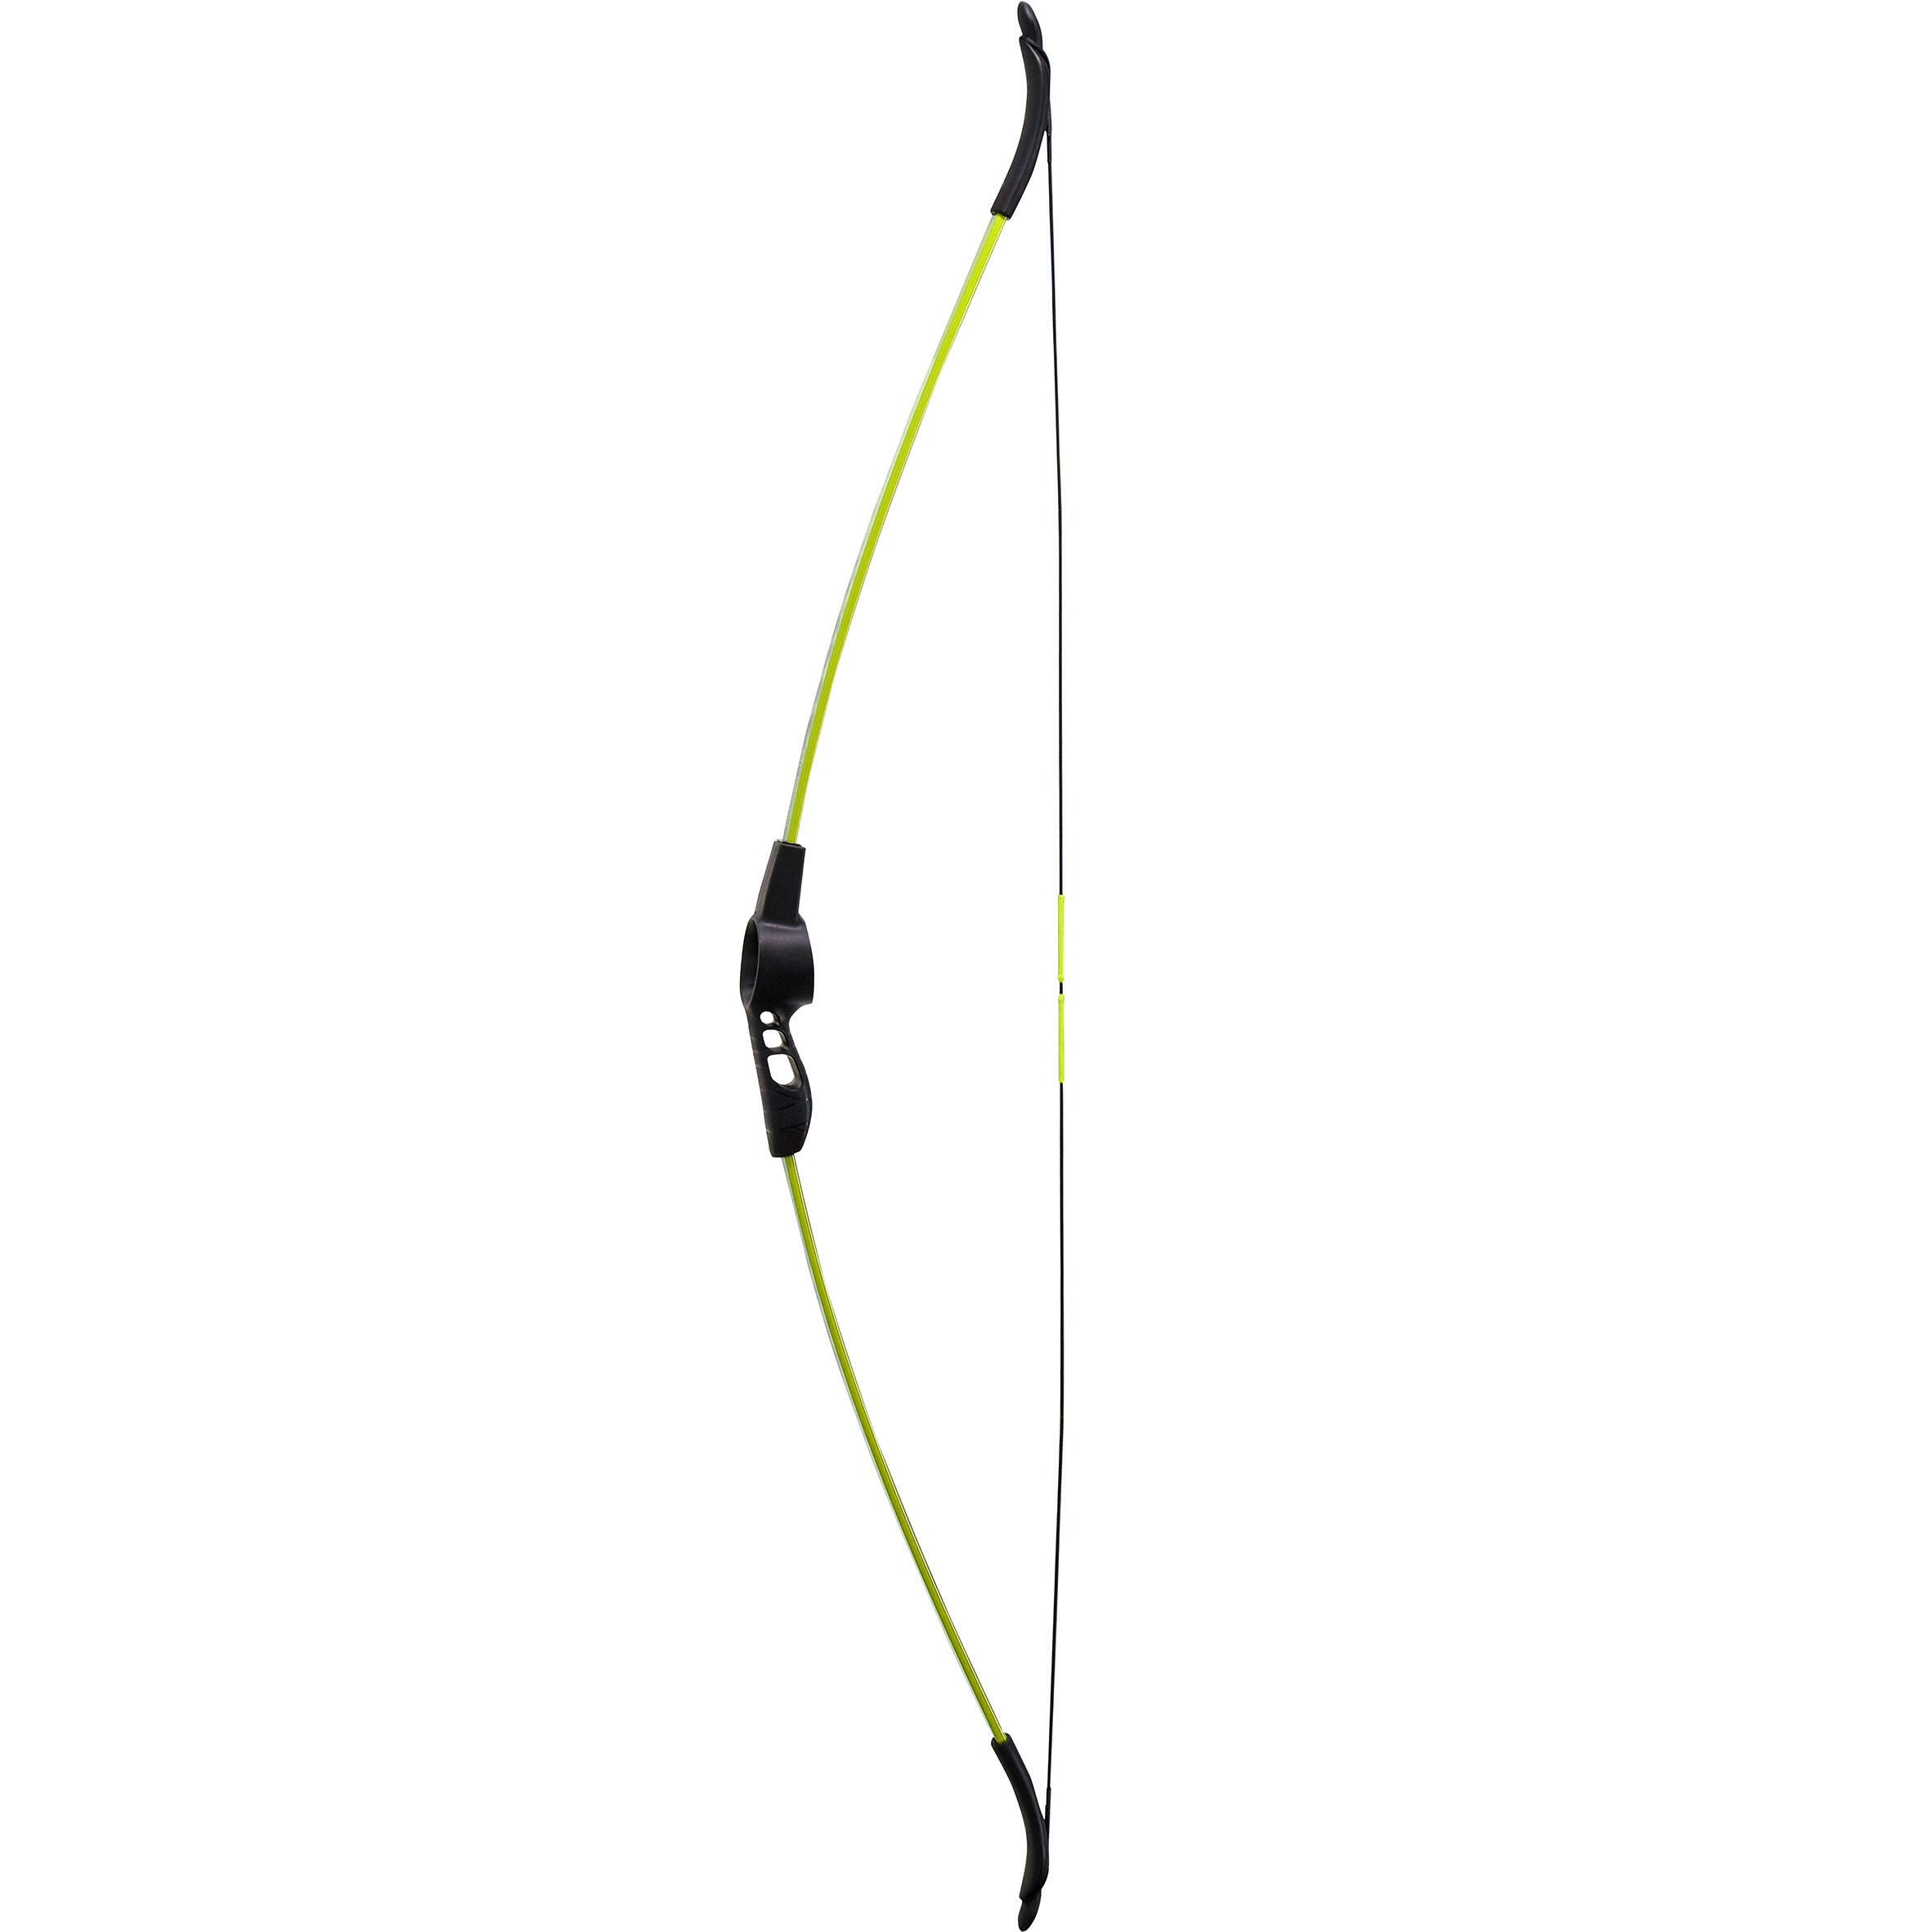 Discovery 100 Archery Bow - Green 4/15